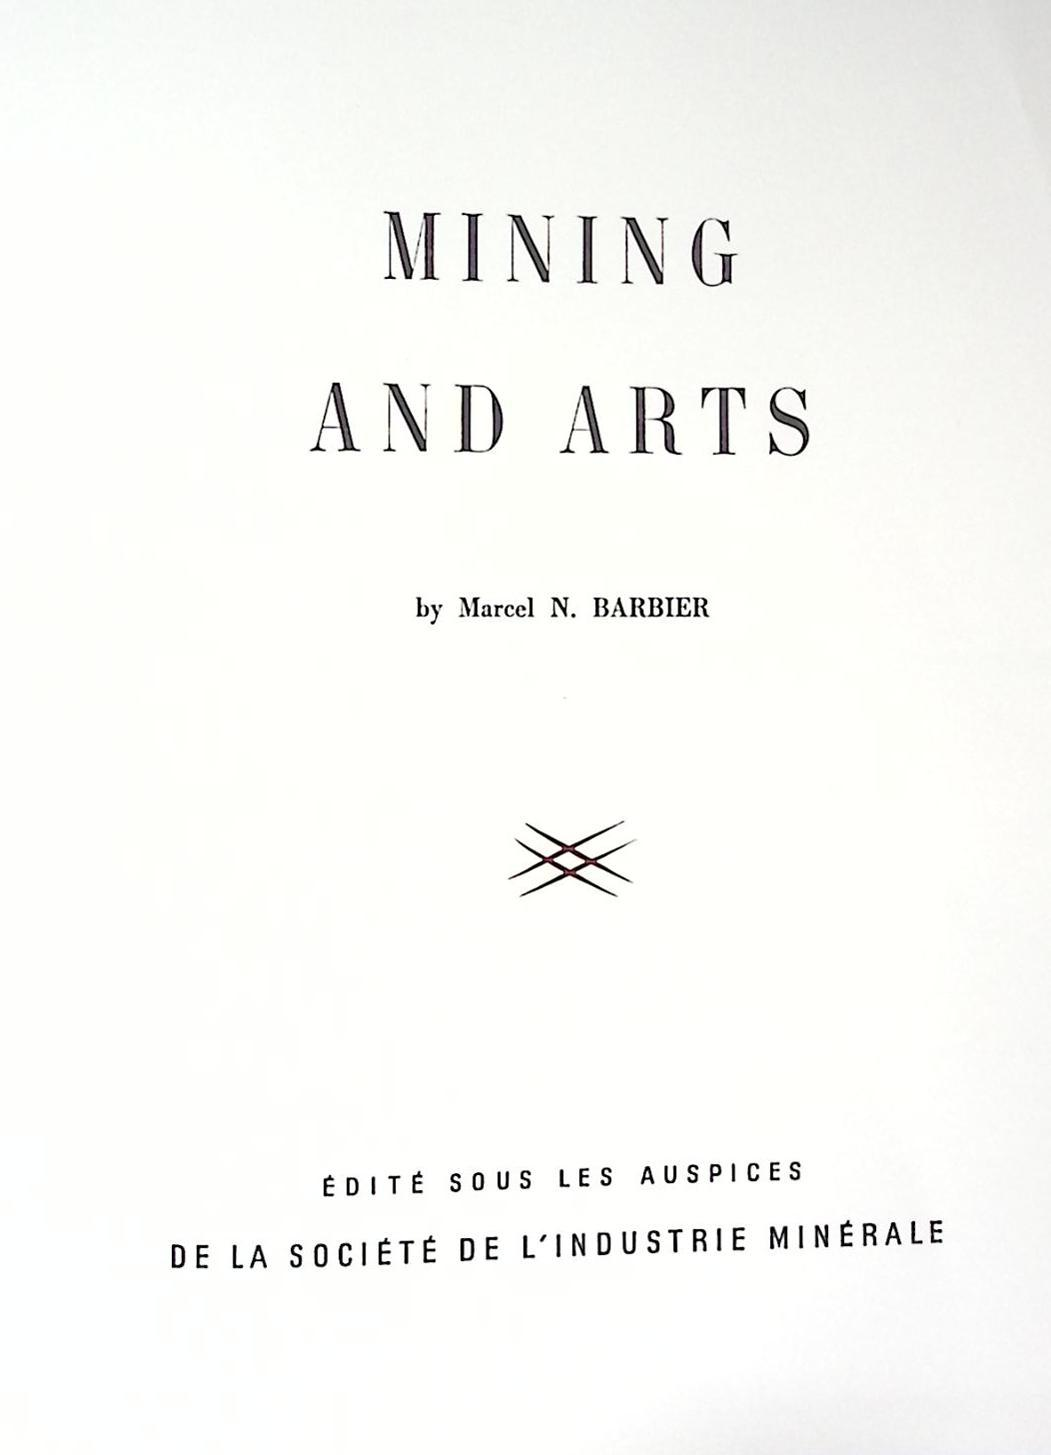 Mining and Arts. Limited edition.